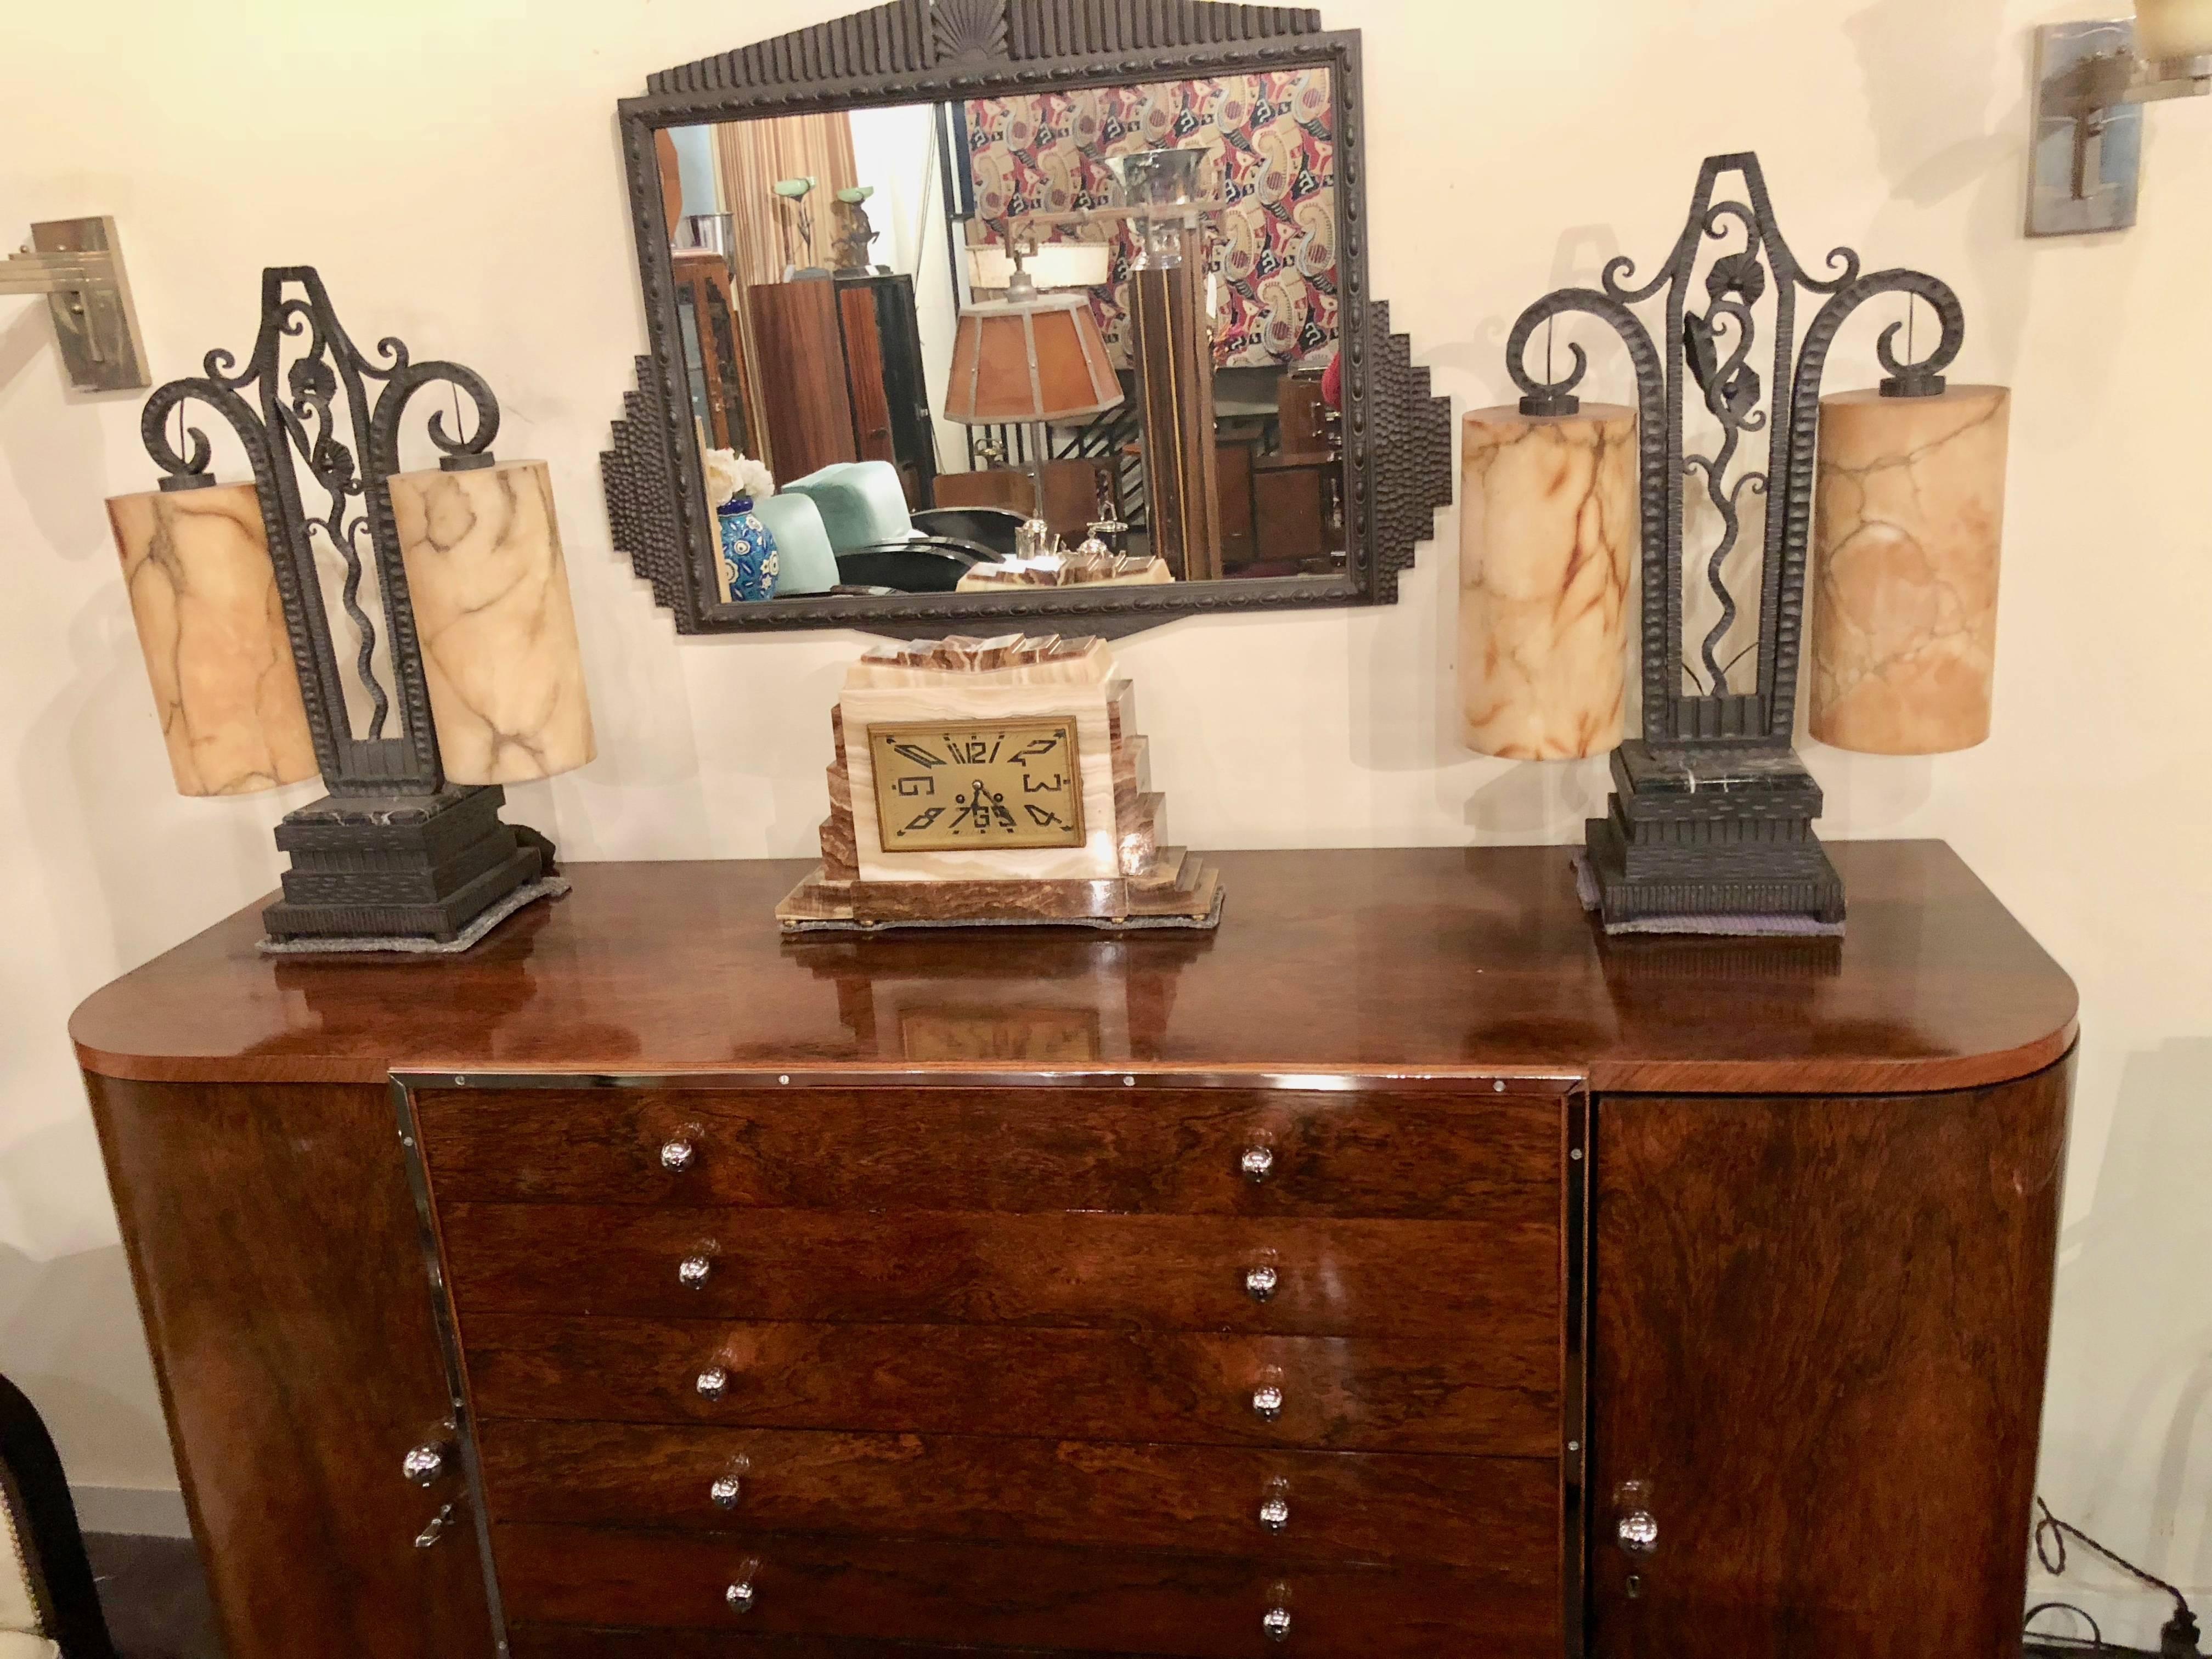 Stunning French Art Deco rosewood buffet cabinet. Modernist design, unusual treatment with multiple drawers all outlined in metal. Complimented using round metal storage pulls. Multiple drawers for dining room needs, silverware, table-cloths and